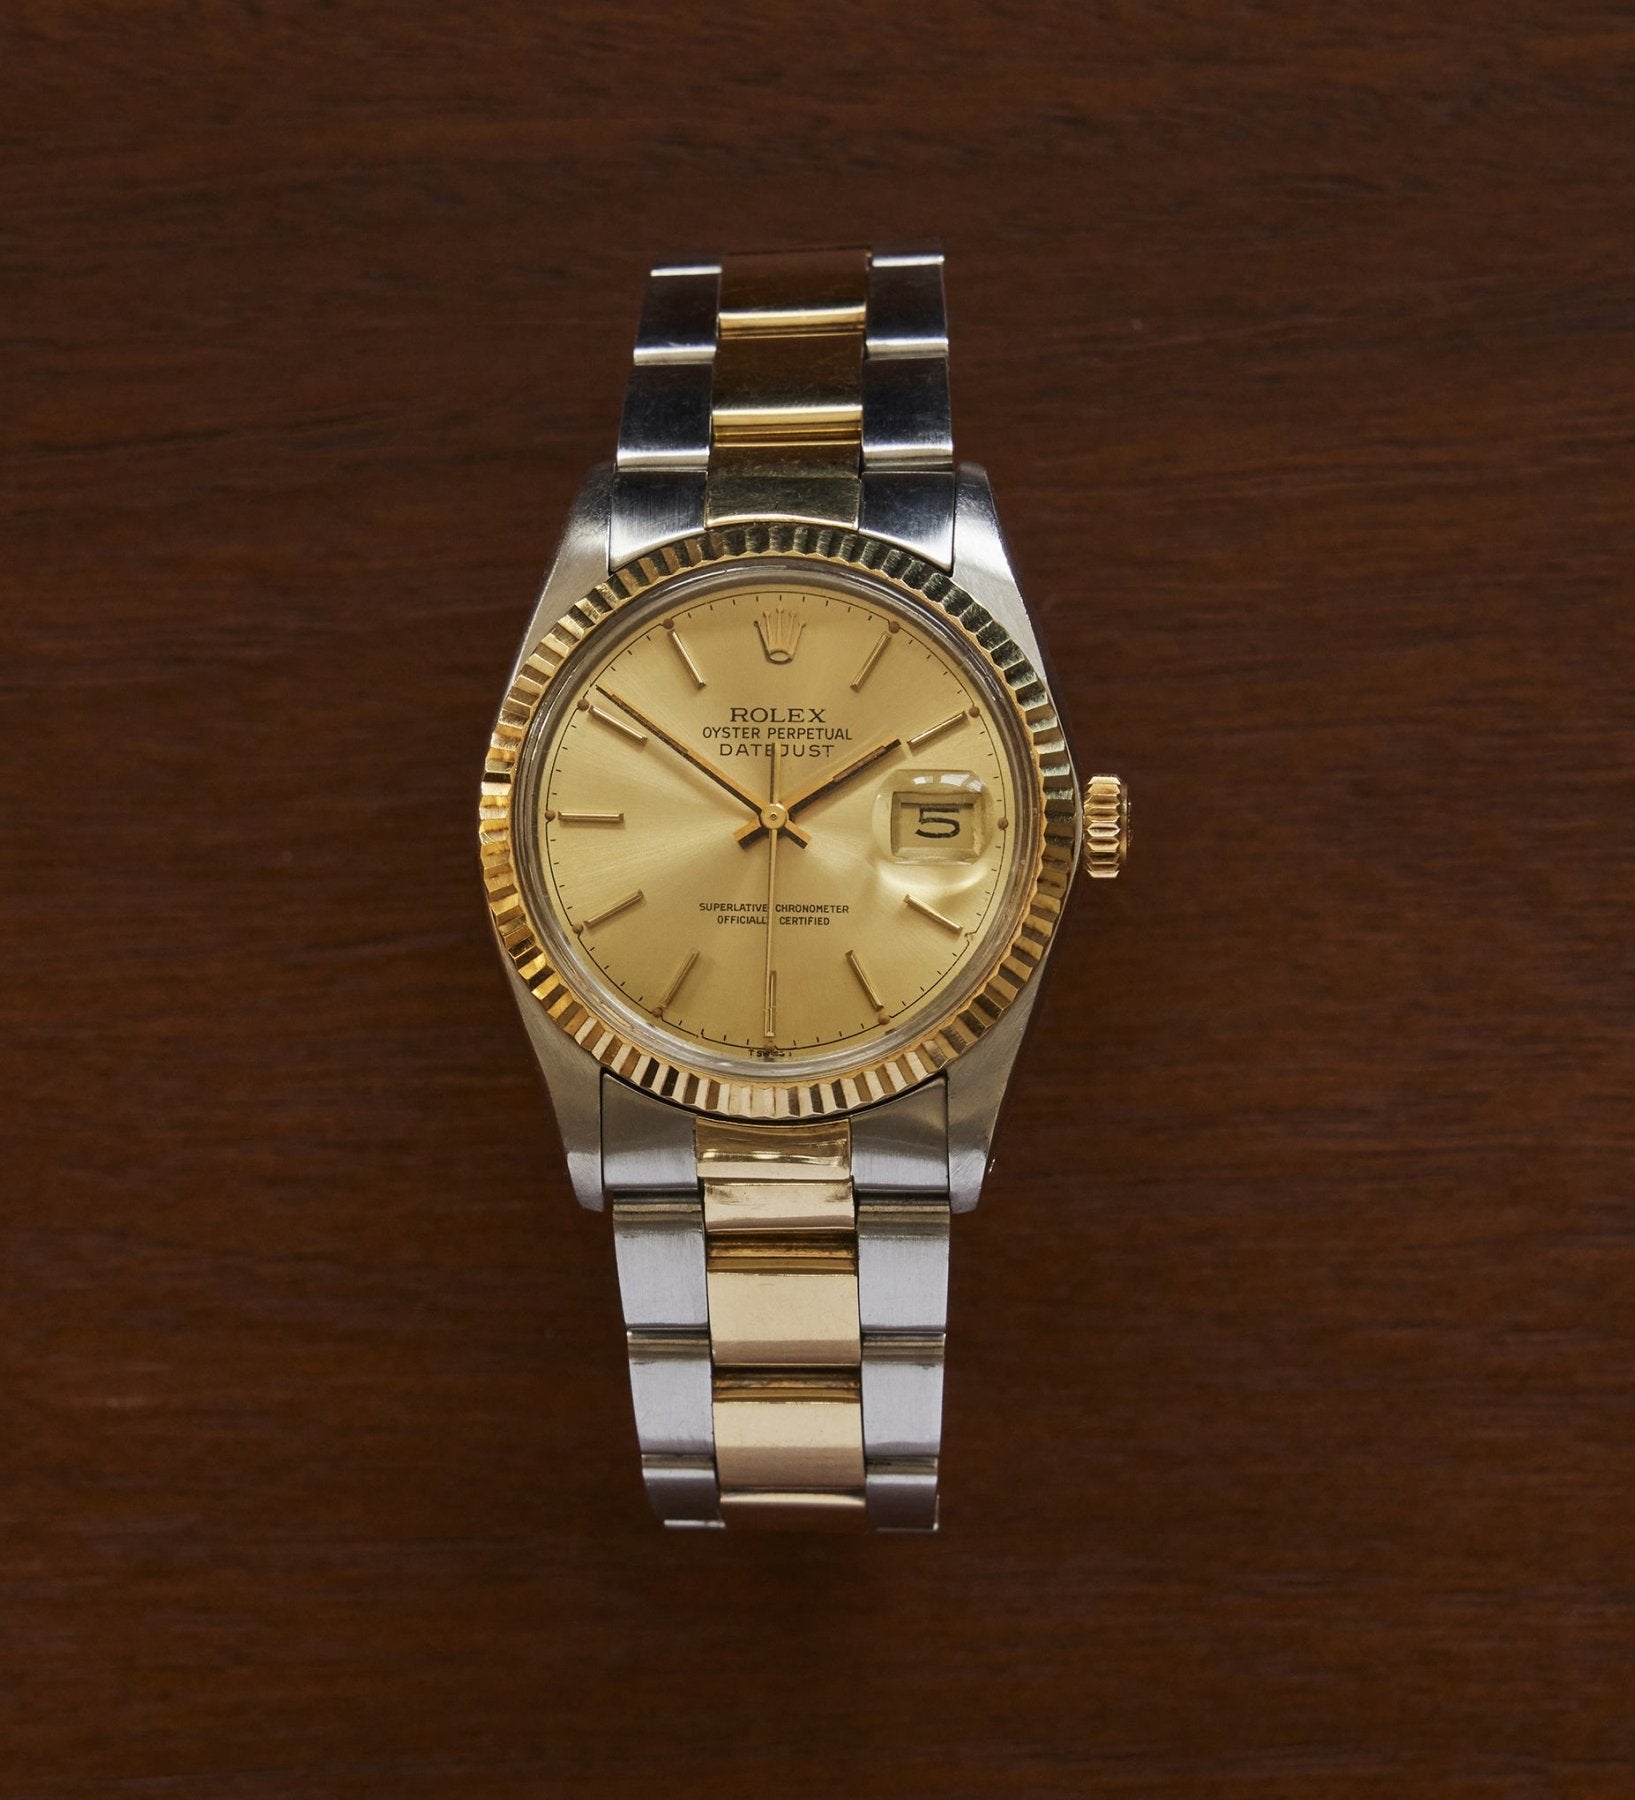 Rolex Oyster Perpetual Datejust 40th Anniversary Watch